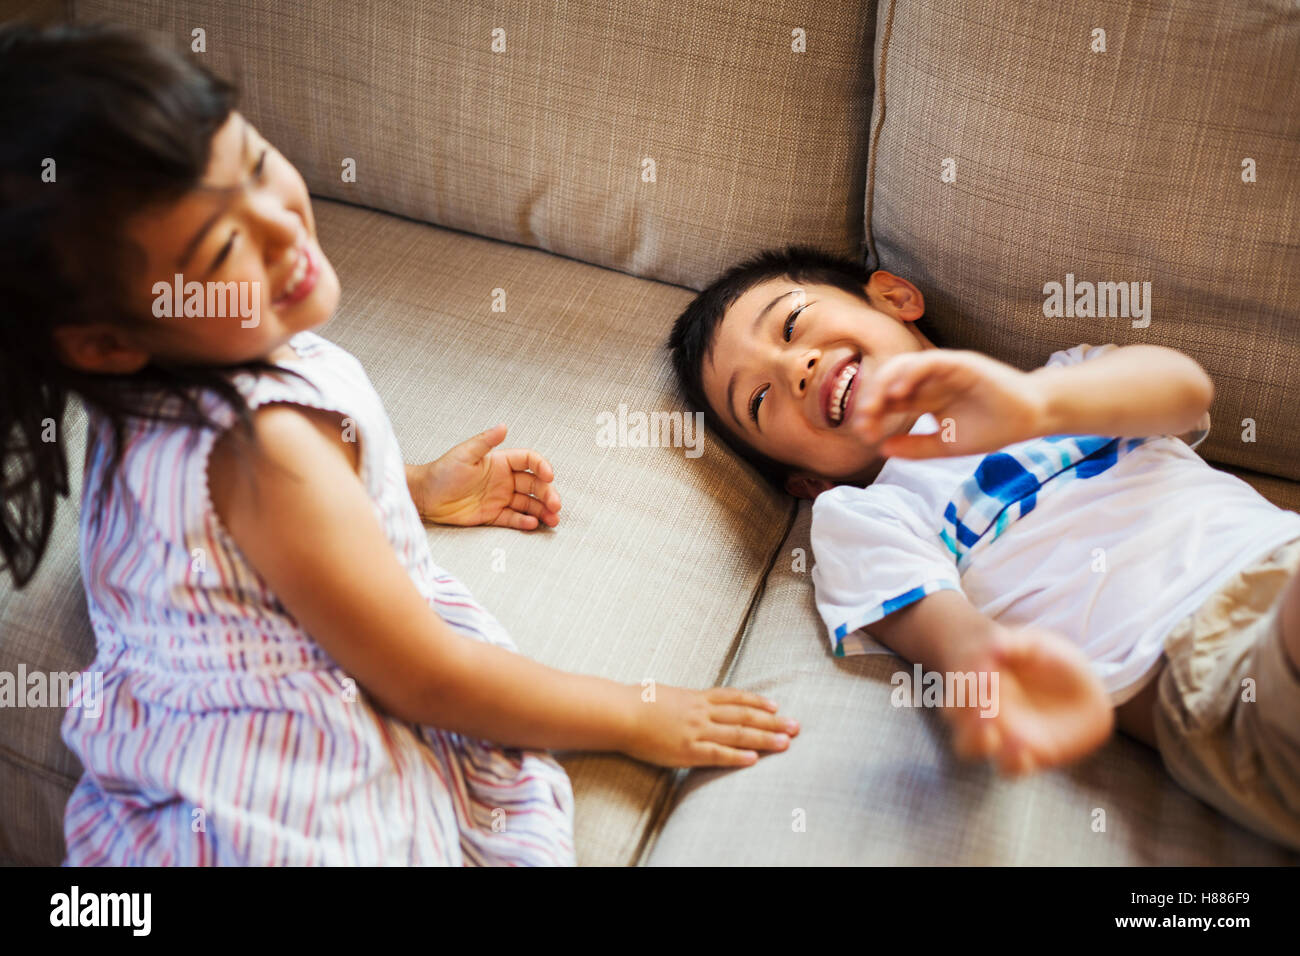 Family home. Two children playing on the floor, giggling. Stock Photo